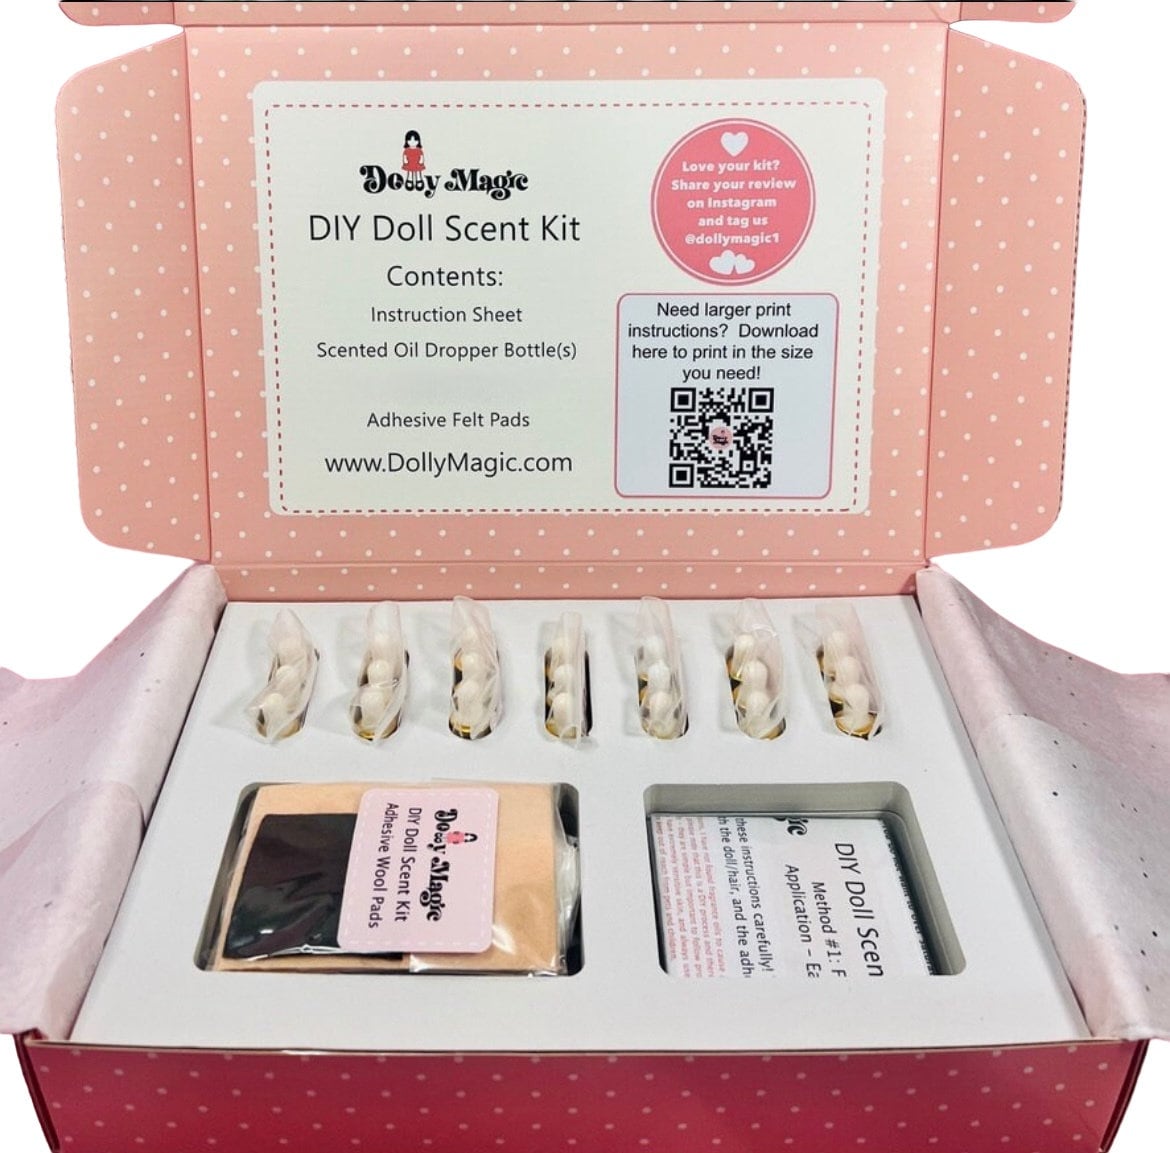 US ORDERS ONLY: DIY Scented Doll Kit - Scent Your Vintage Strawberry Shortcake Dolls!